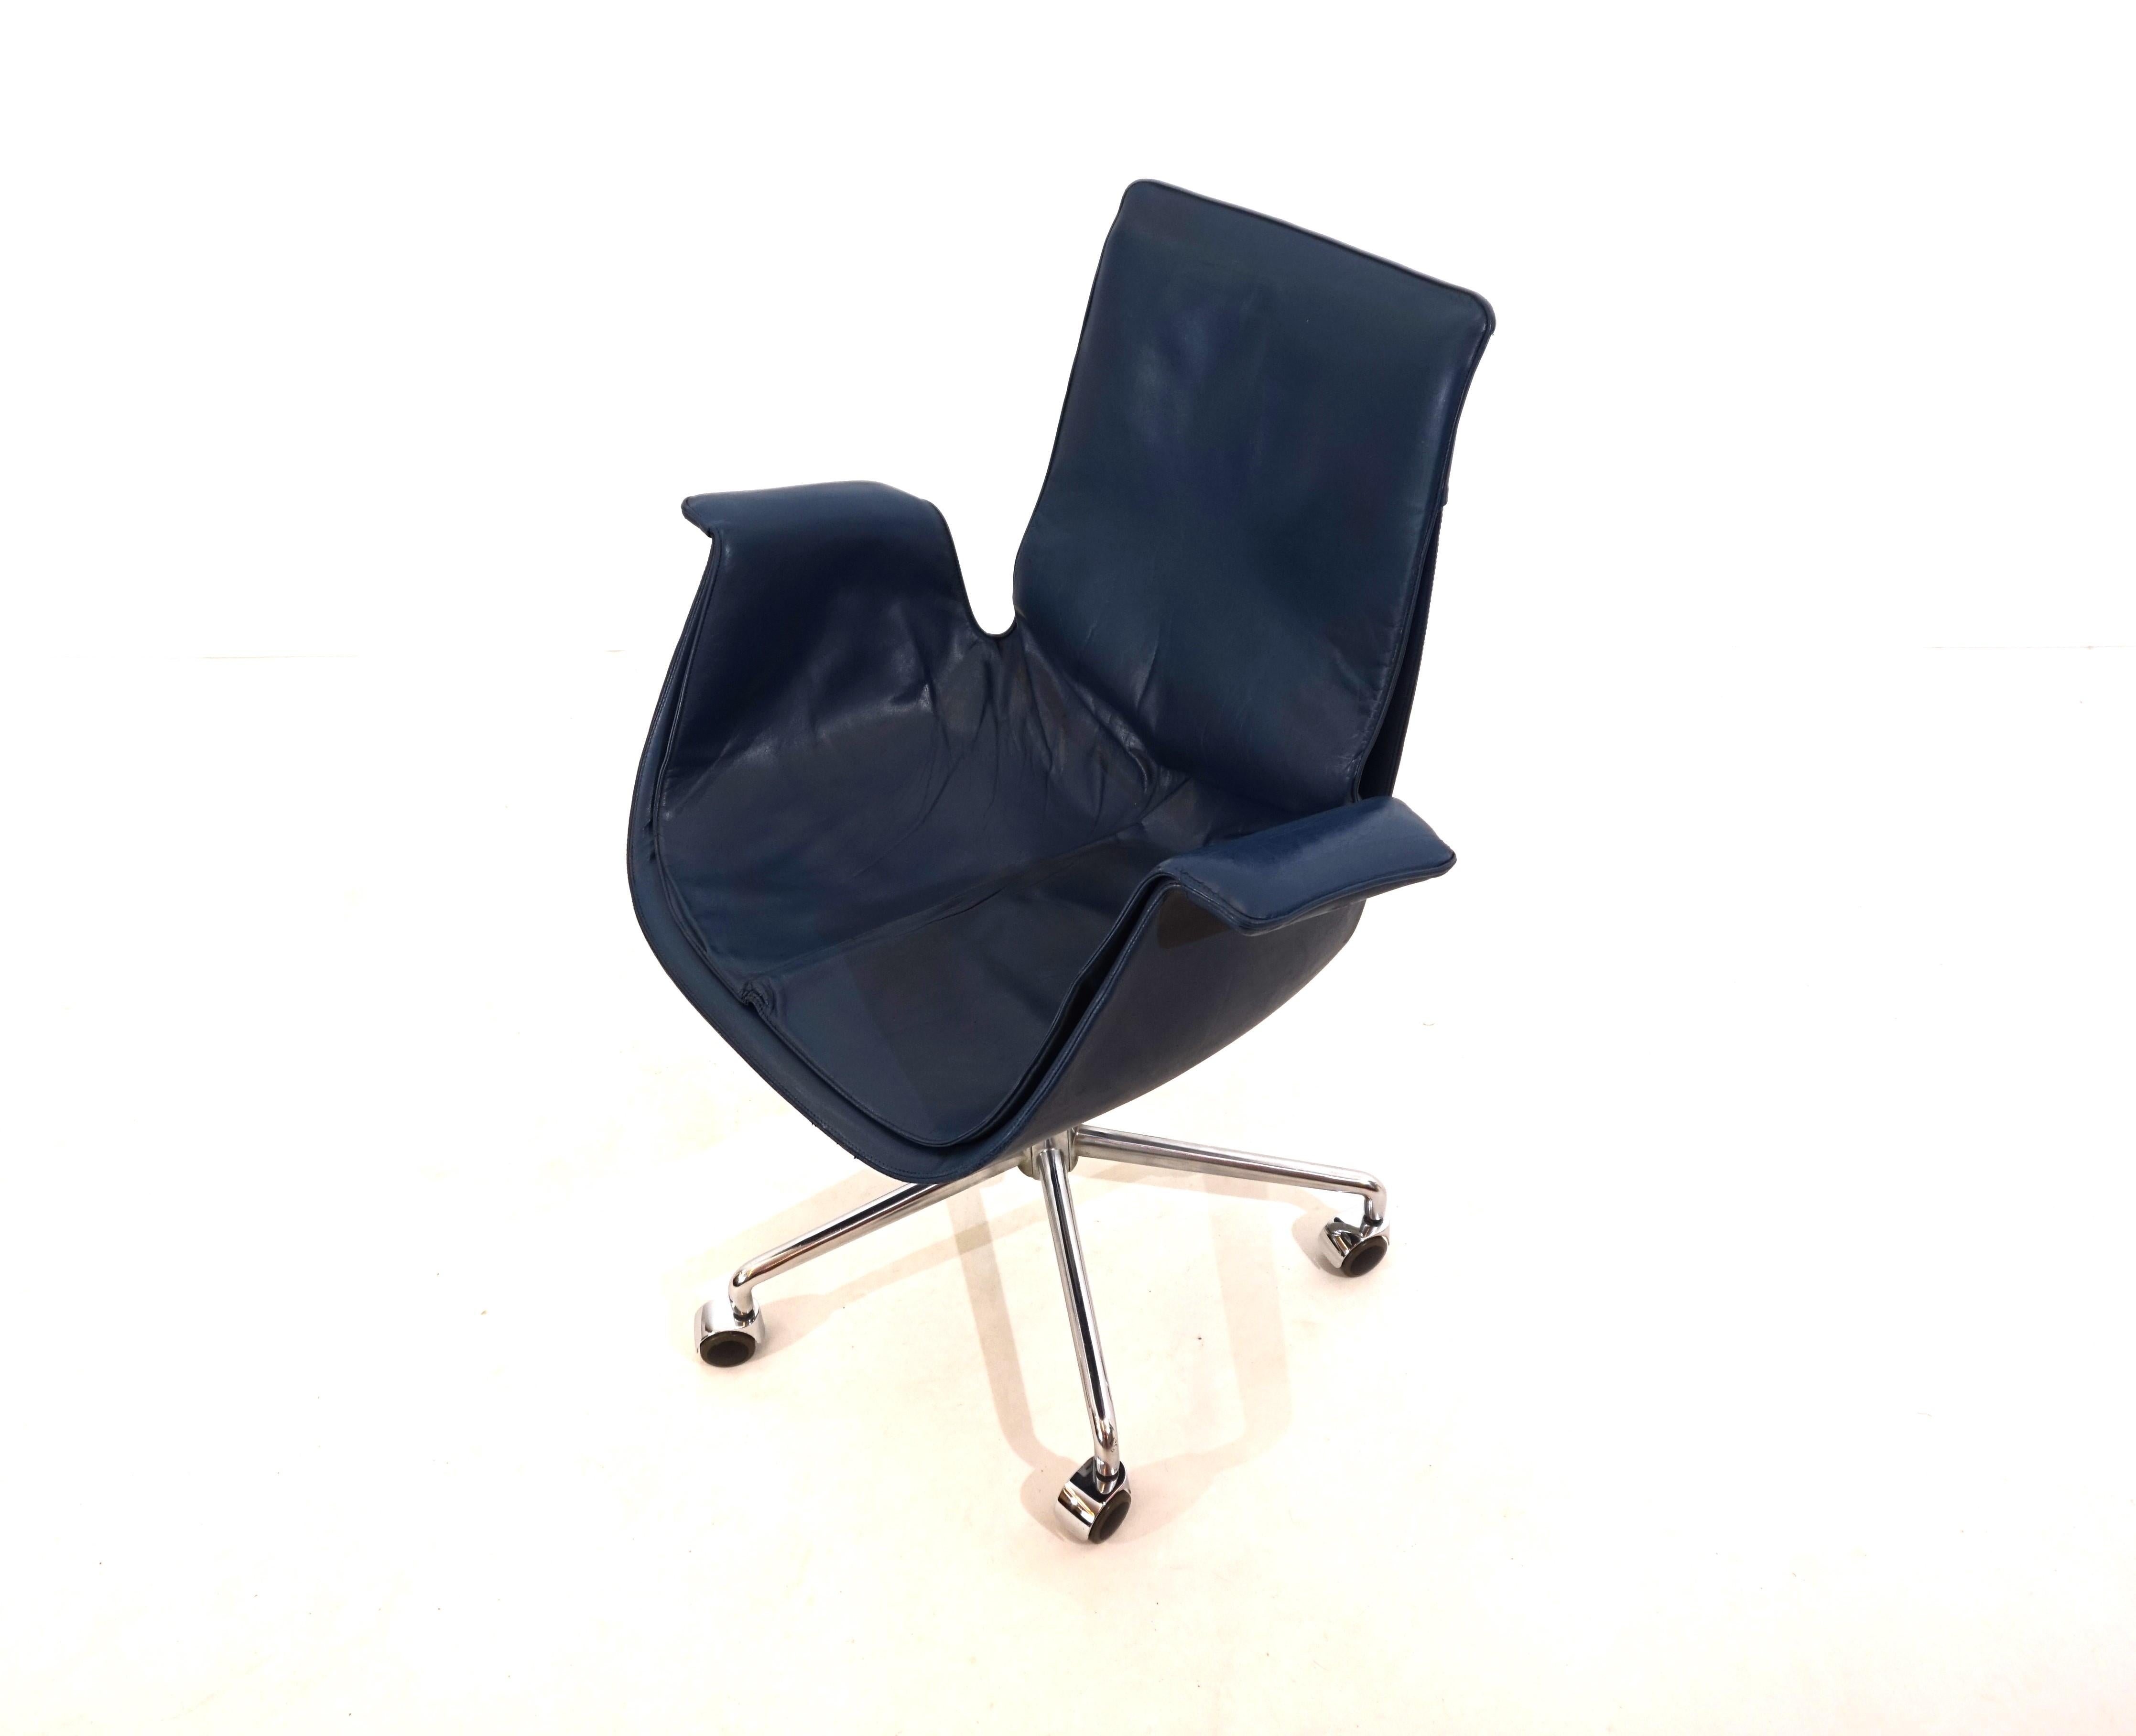 This Kill 6727, the so-called Bird or Tulip chair, is the hard-to-find version of an office chair with height adjustment. The blue leather comes in excellent condition with beautiful patina and minimal signs of wear. The chrome frame with